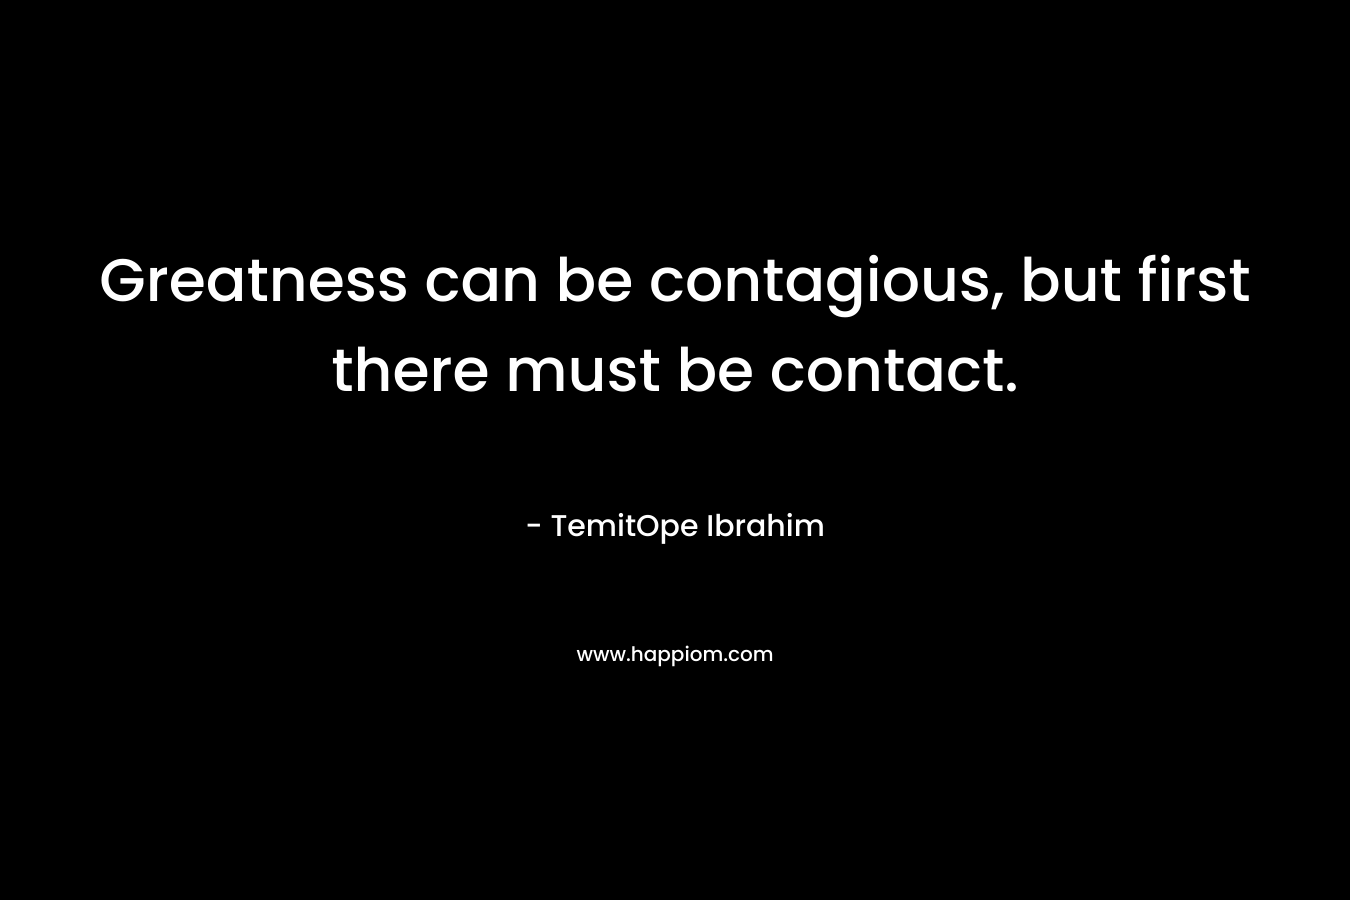 Greatness can be contagious, but first there must be contact.